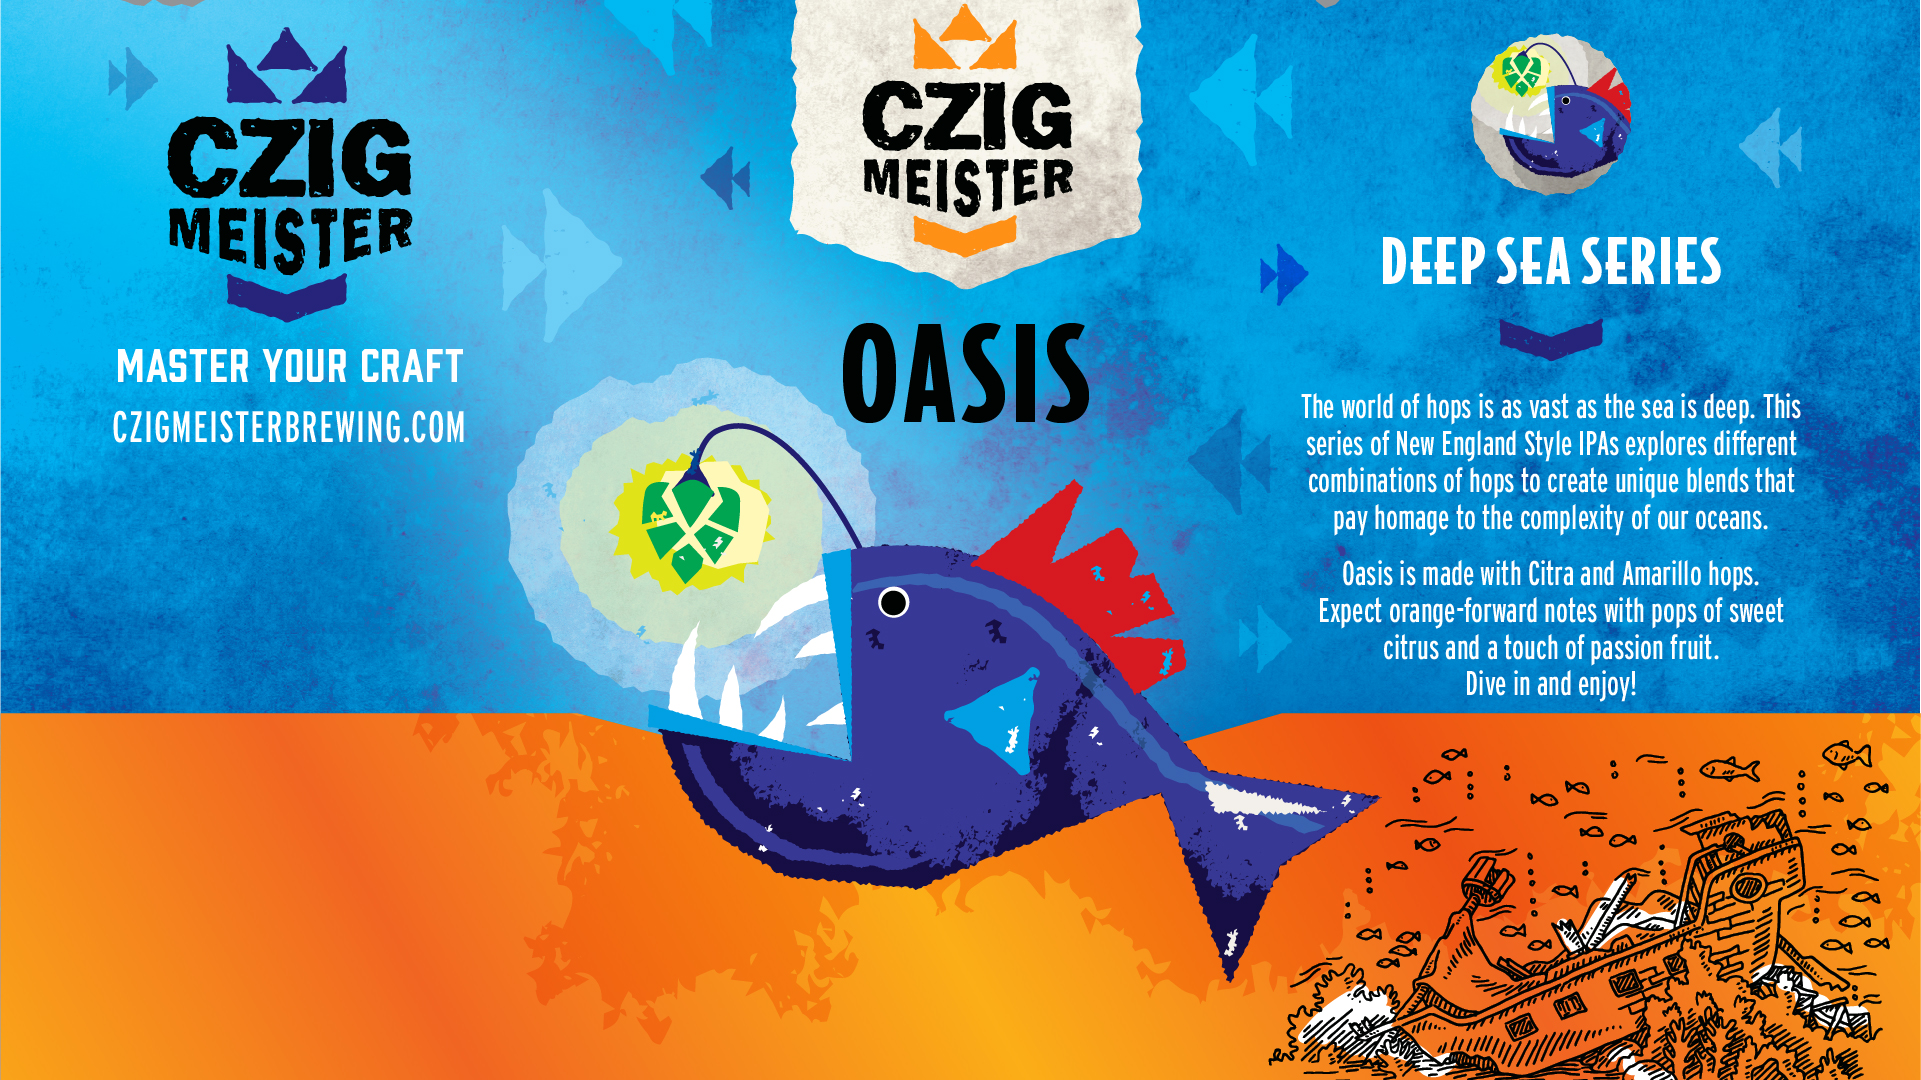 Deep Sea Series Oasis from Czig Meister Brewing Company releasing October 14th